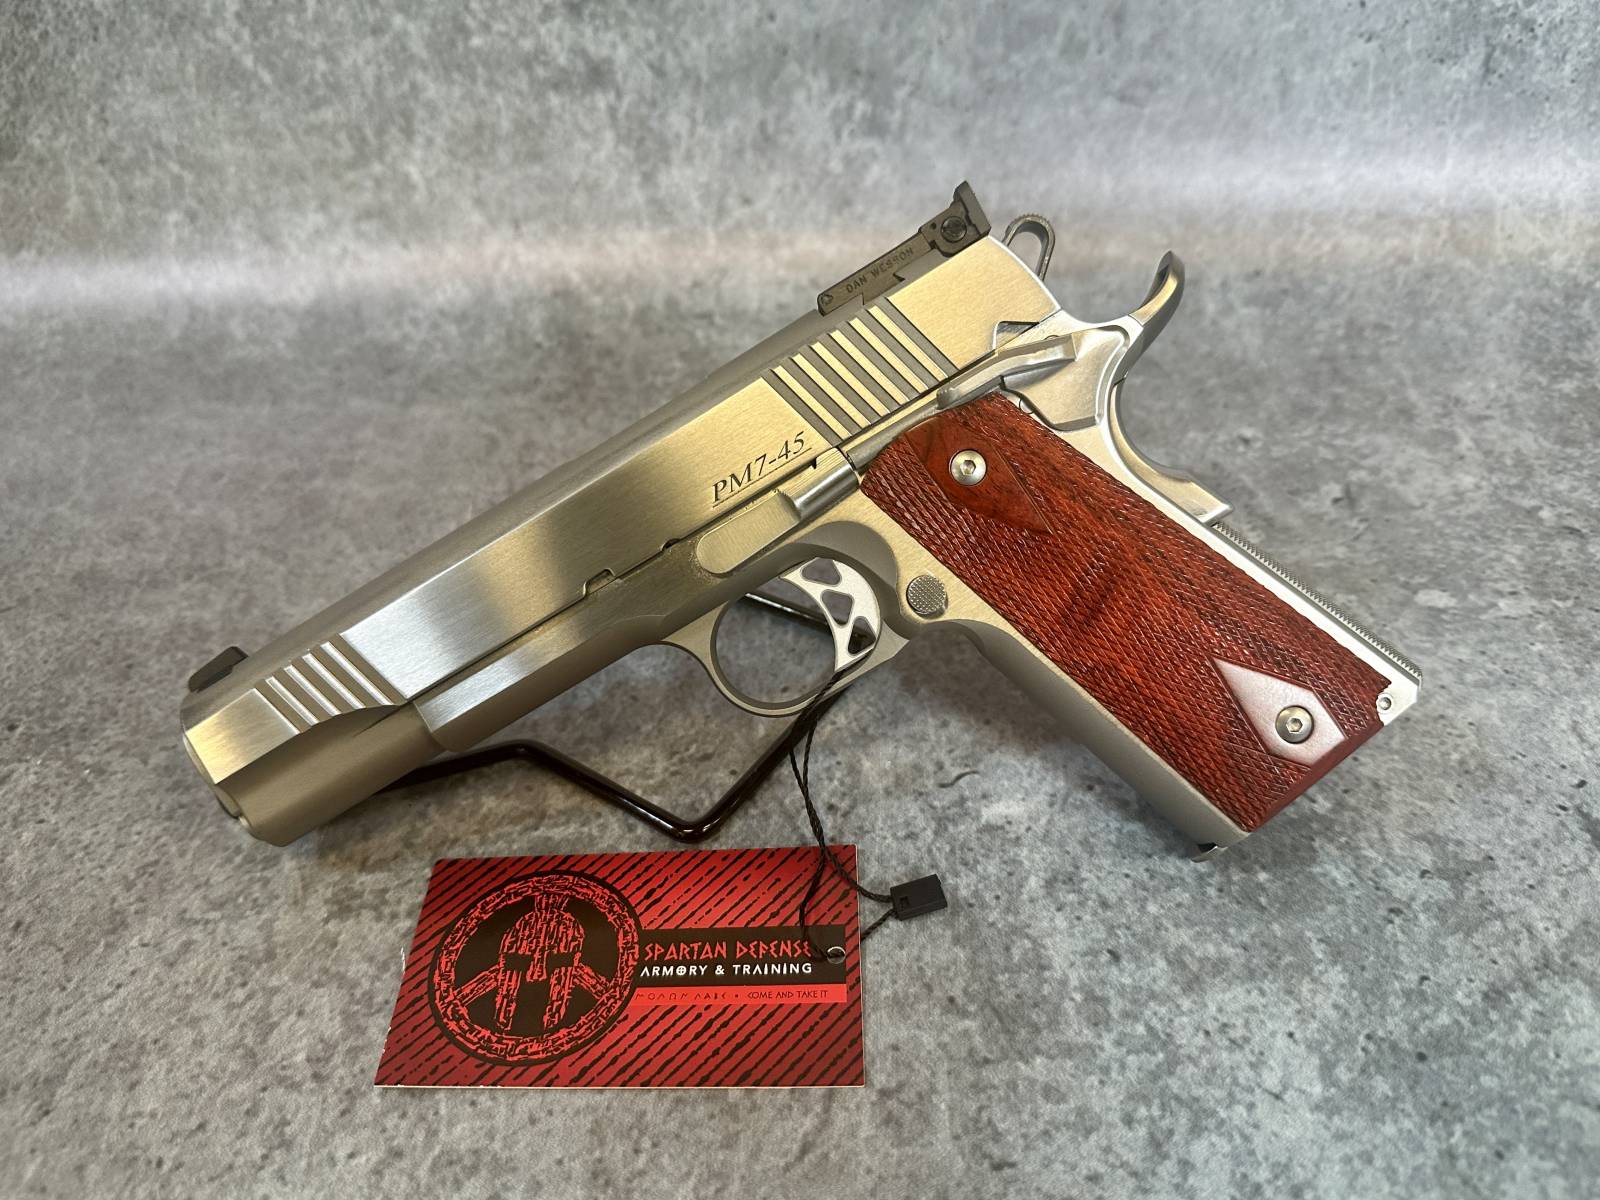 Dan Wesson Pointman Seven, Stainless Steel Frame, 45 ACP 8+1 5", 01900-img-1